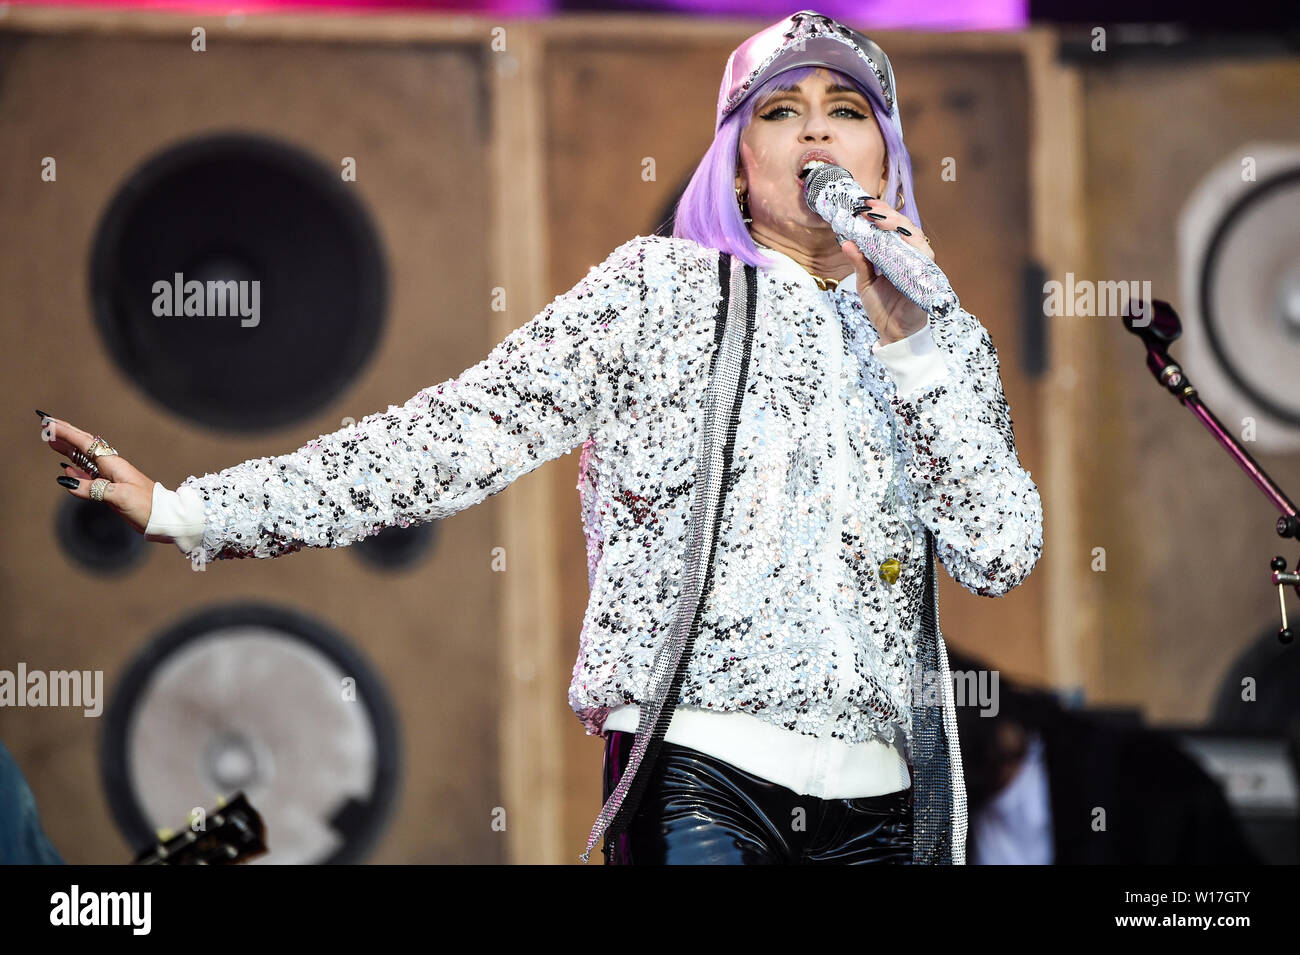 Glastonbury, Pilton, Somerset, UK. 30th June 2019. Miley Cyrus performs on the Pyramid stage at Glastonbury Festival on 30th June 2019. Picture by Tabatha Fireman / Female Perspective Credit: Female Perspective/Alamy Live News Stock Photo